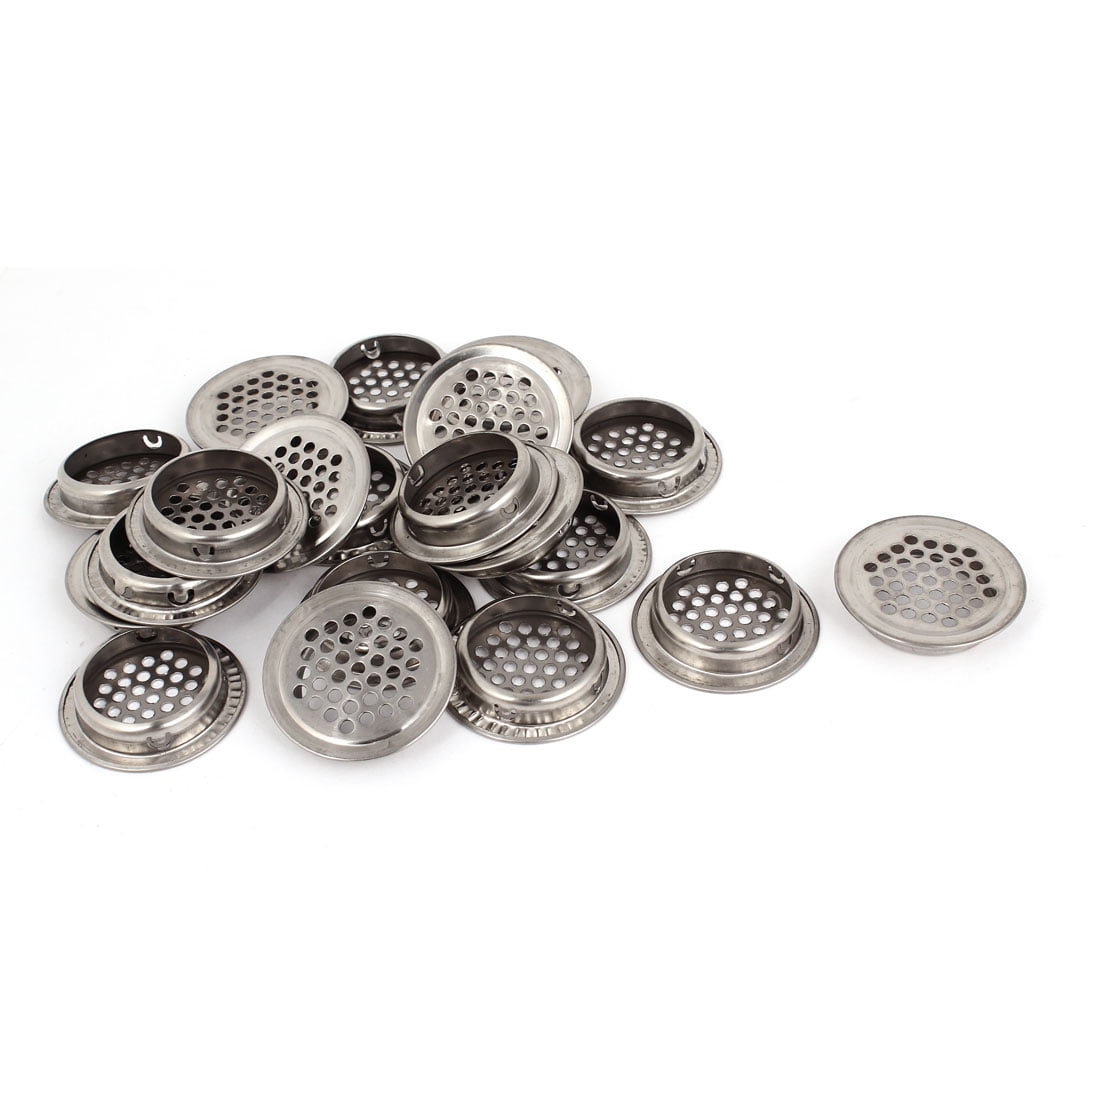 20pcs 35mm Diameter Round Stainless Steel Mesh Cabinet Air Vent Louver Cover